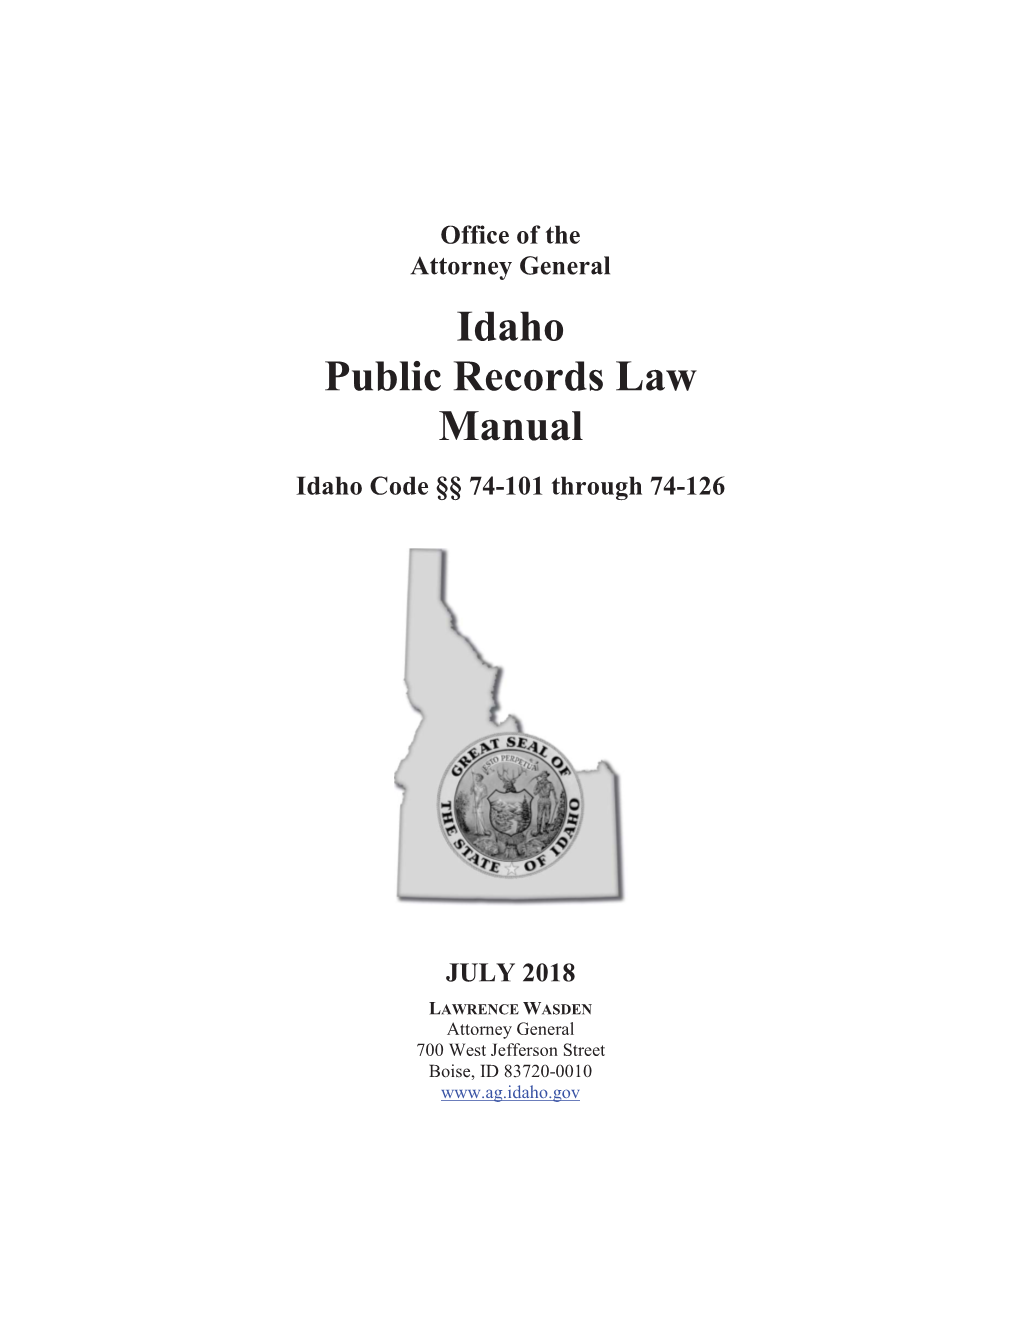 Office of the Attorney General Idaho Public Records Law Manual Idaho Code §§ 74-101 Through 74-126